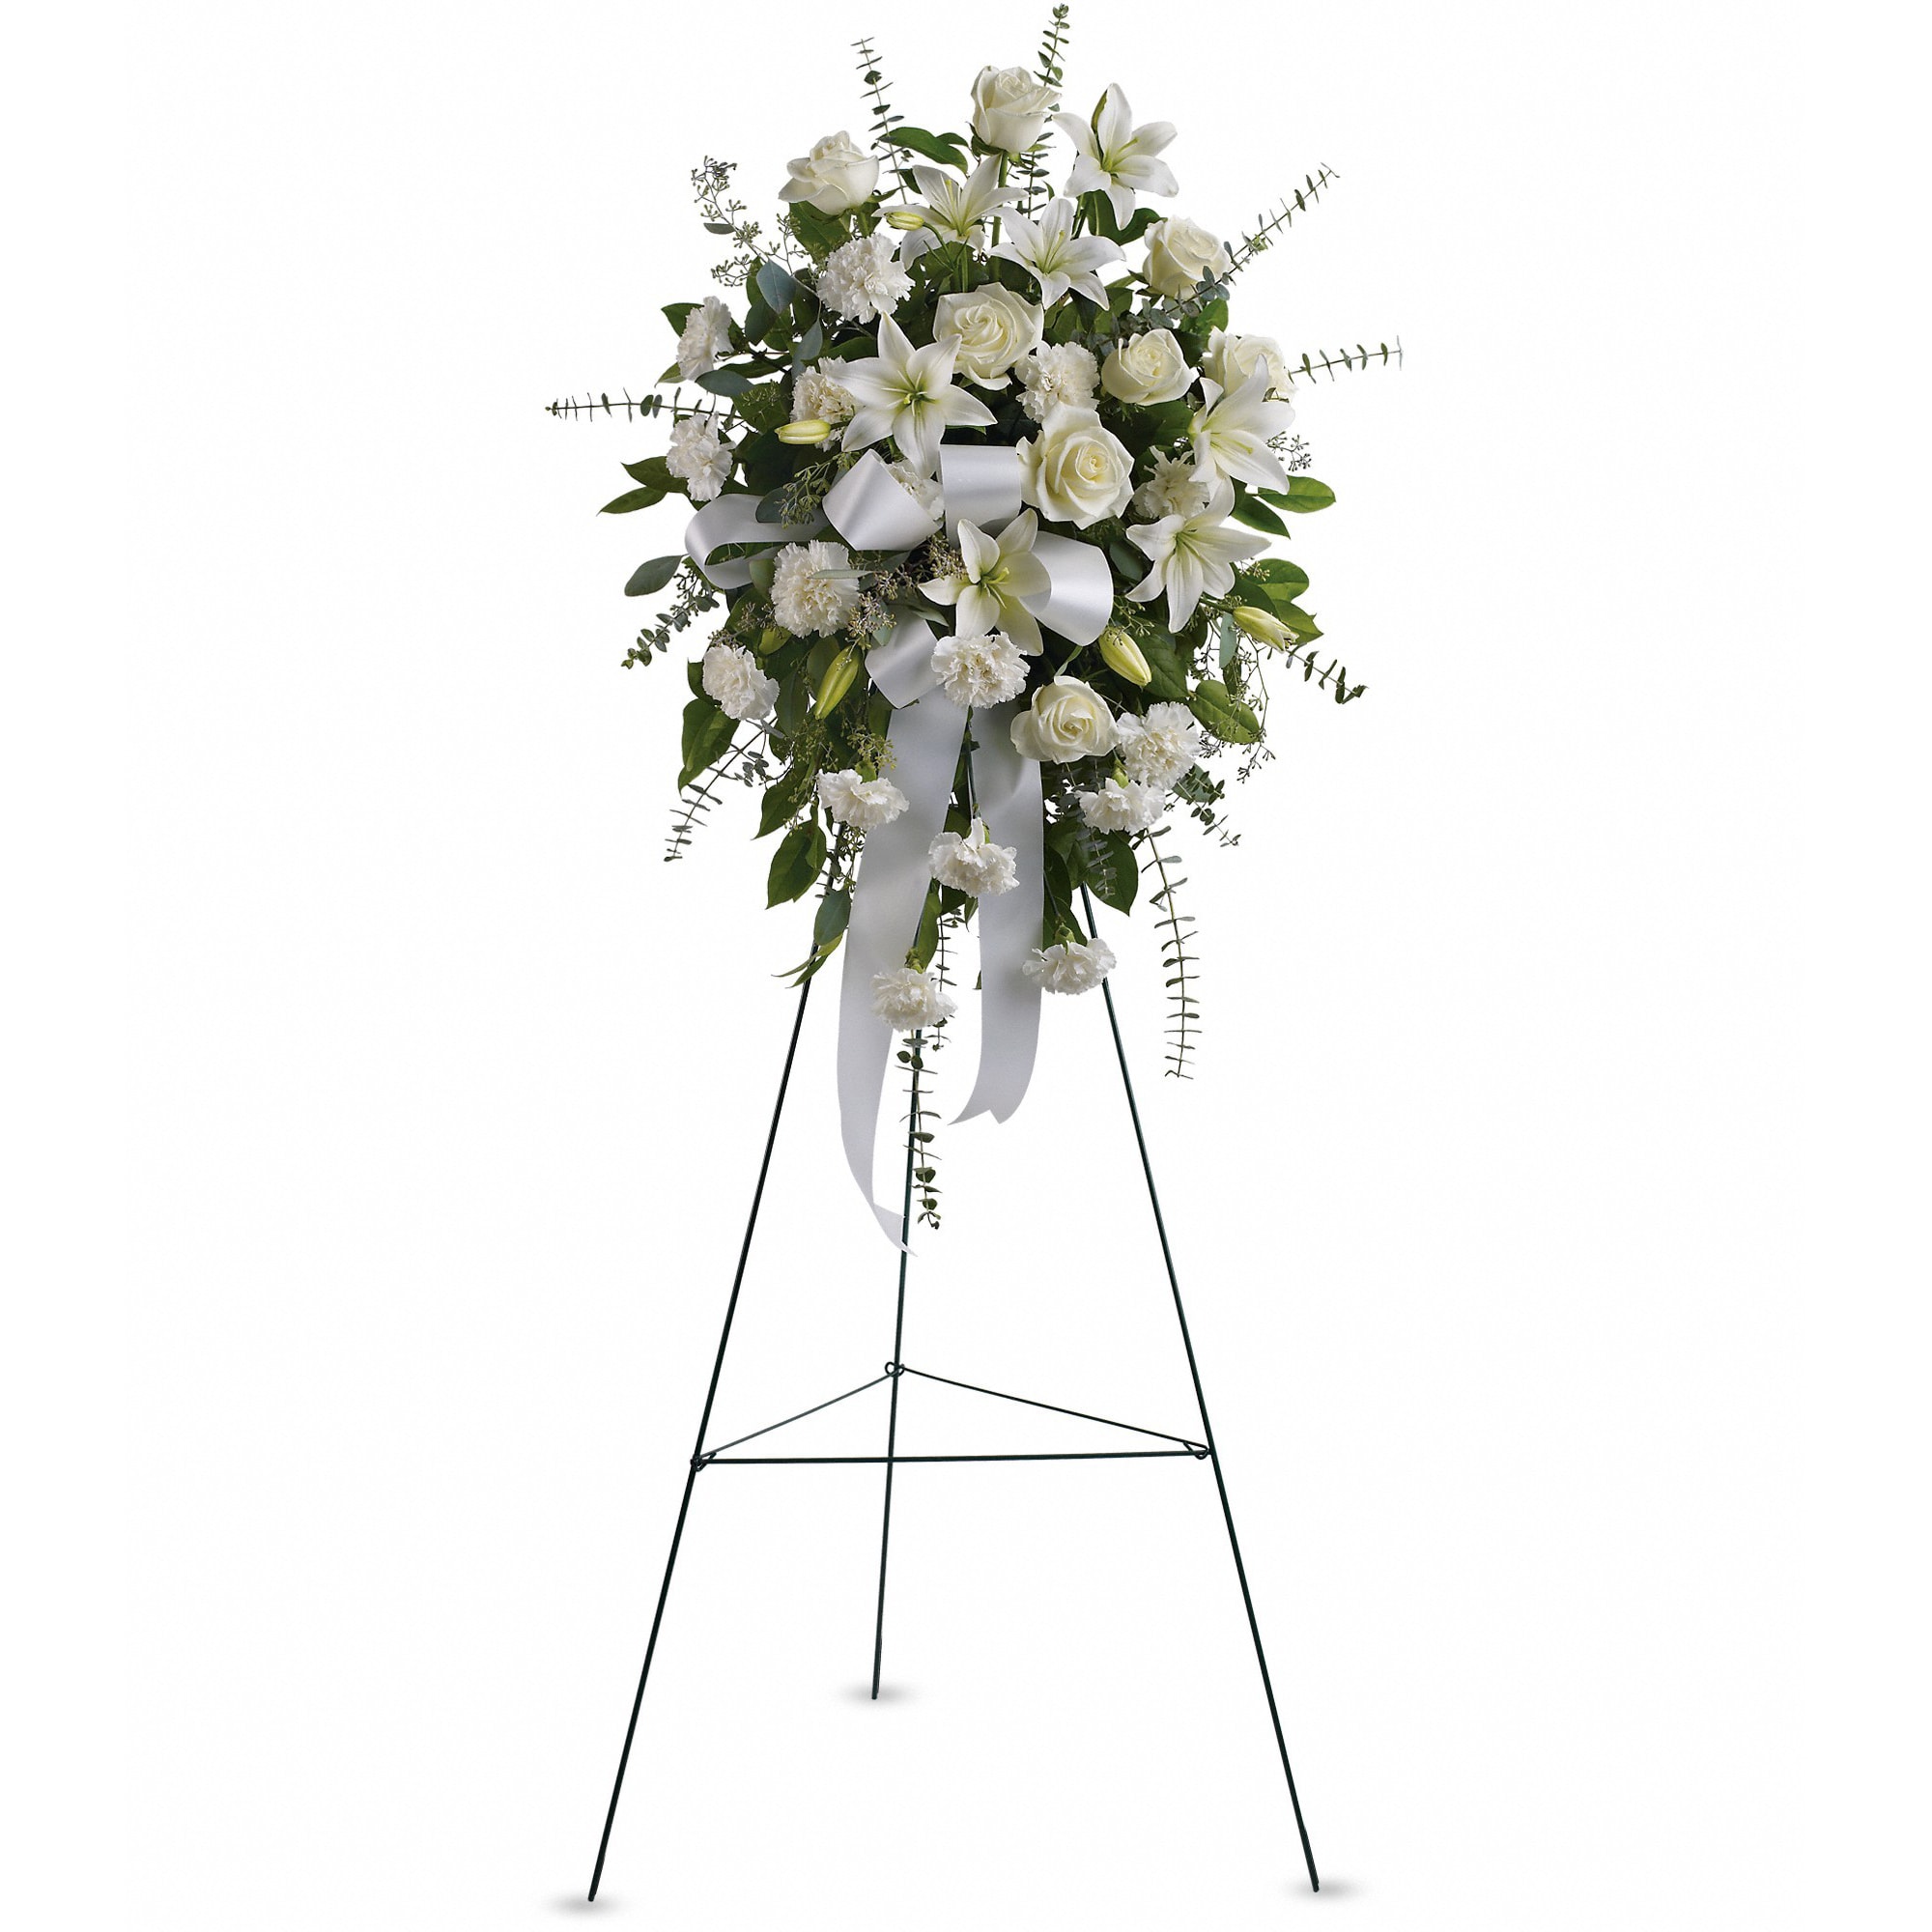 Sentiments of Serenity Spray by Teleflora - Beautifully simple, this lovely spray of white roses, lilies and carnations decorated with white satin ribbon is a tasteful way to express your sympathy. 